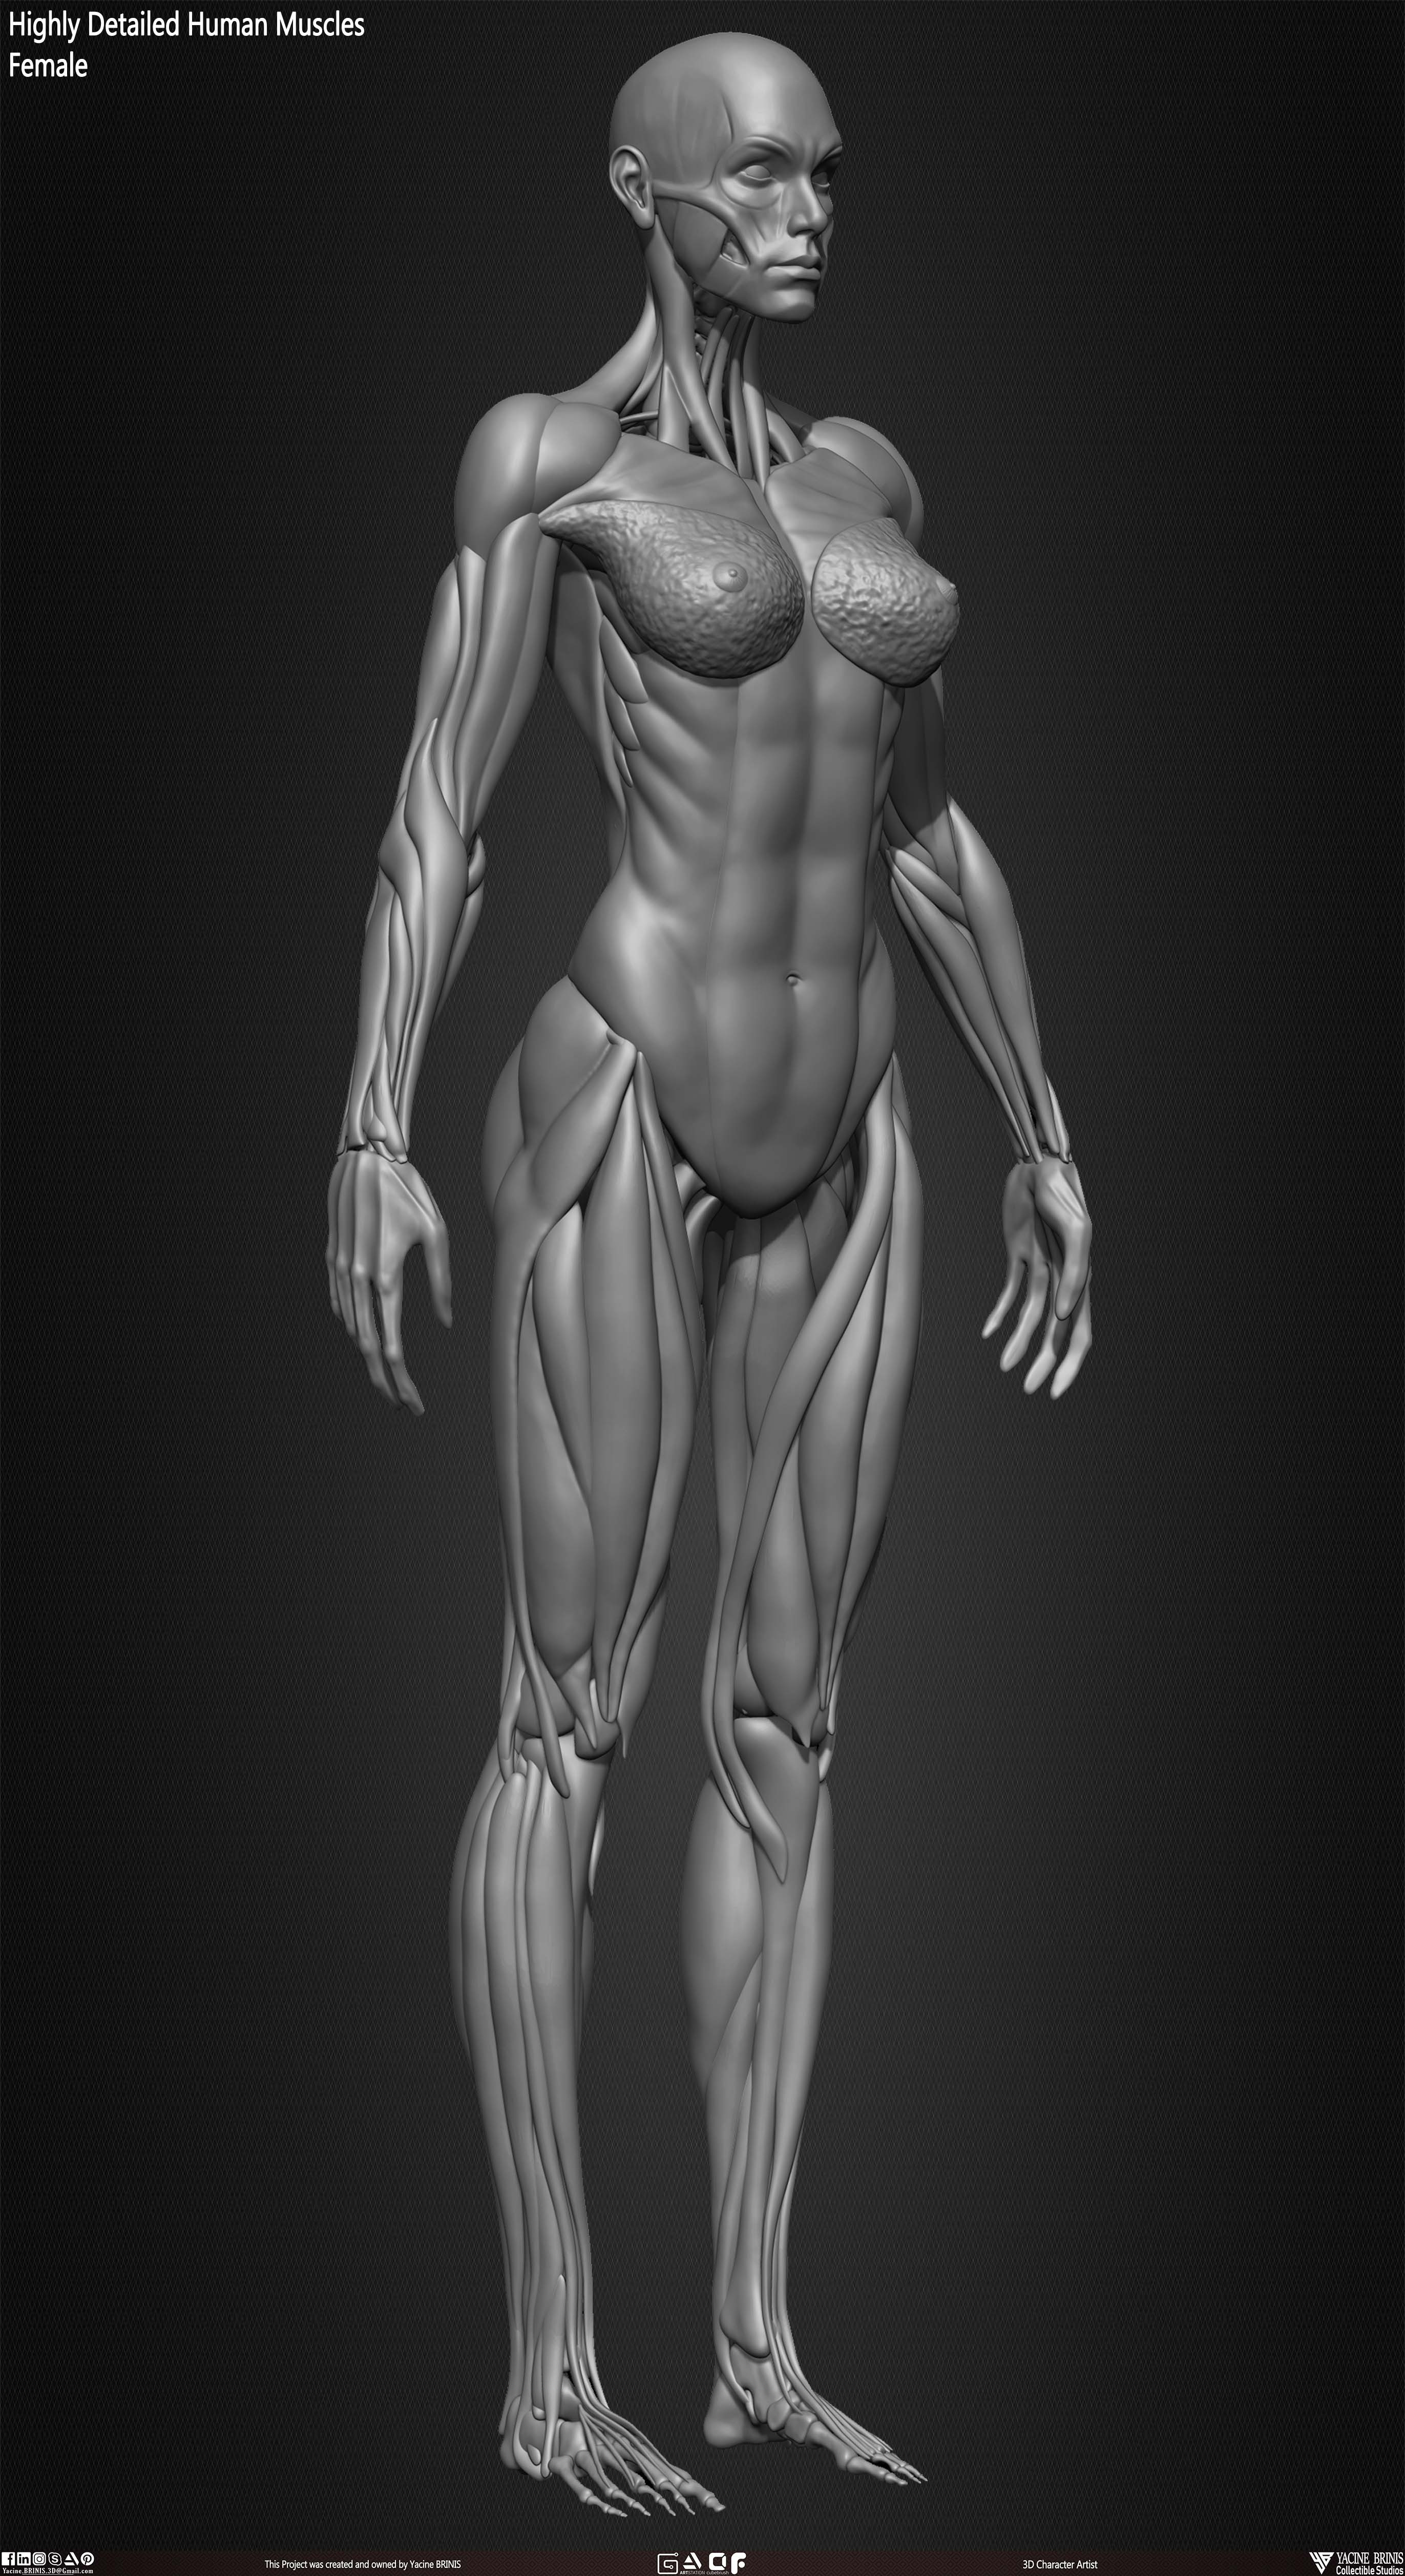 Female Human Muscles 3D Model sculpted by Yacine BRINIS 021